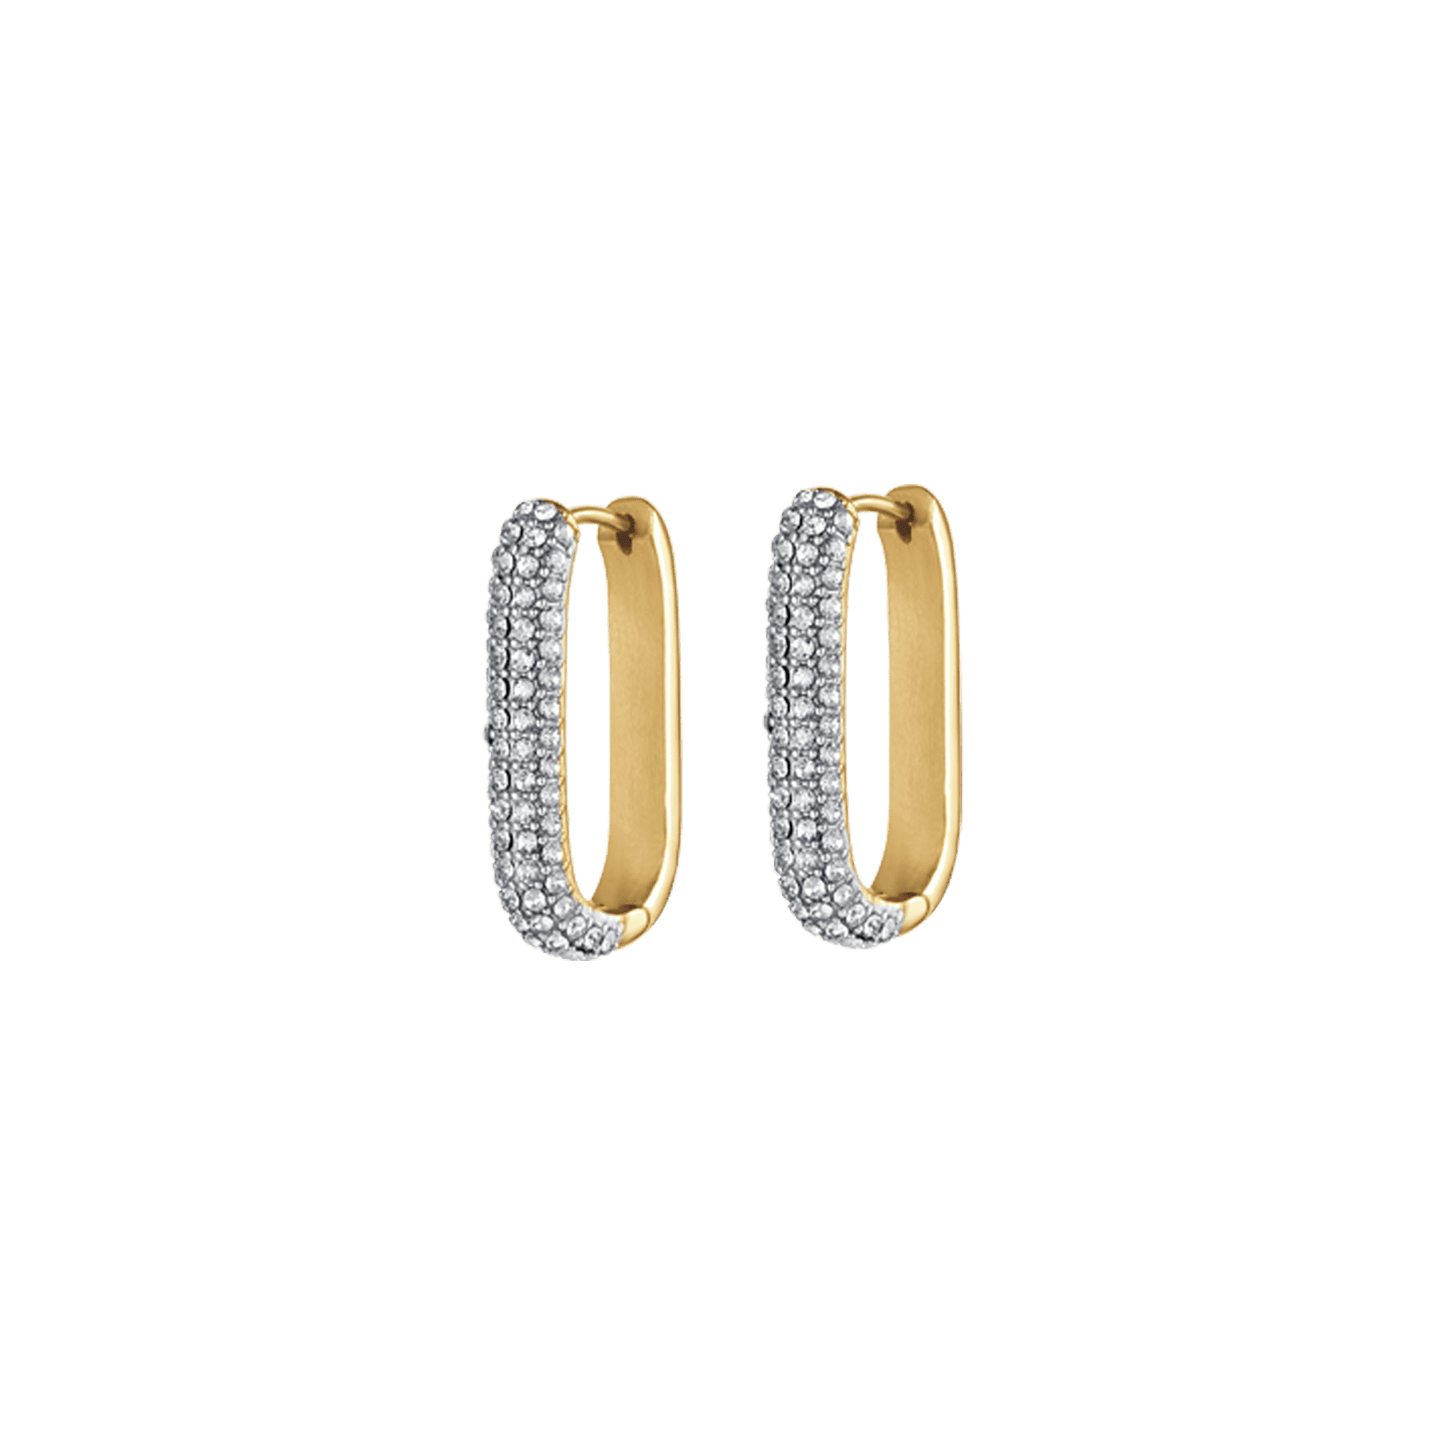 IP GOLD STEEL WOMEN'S EARRINGS WITH WHITE CRYSTALS